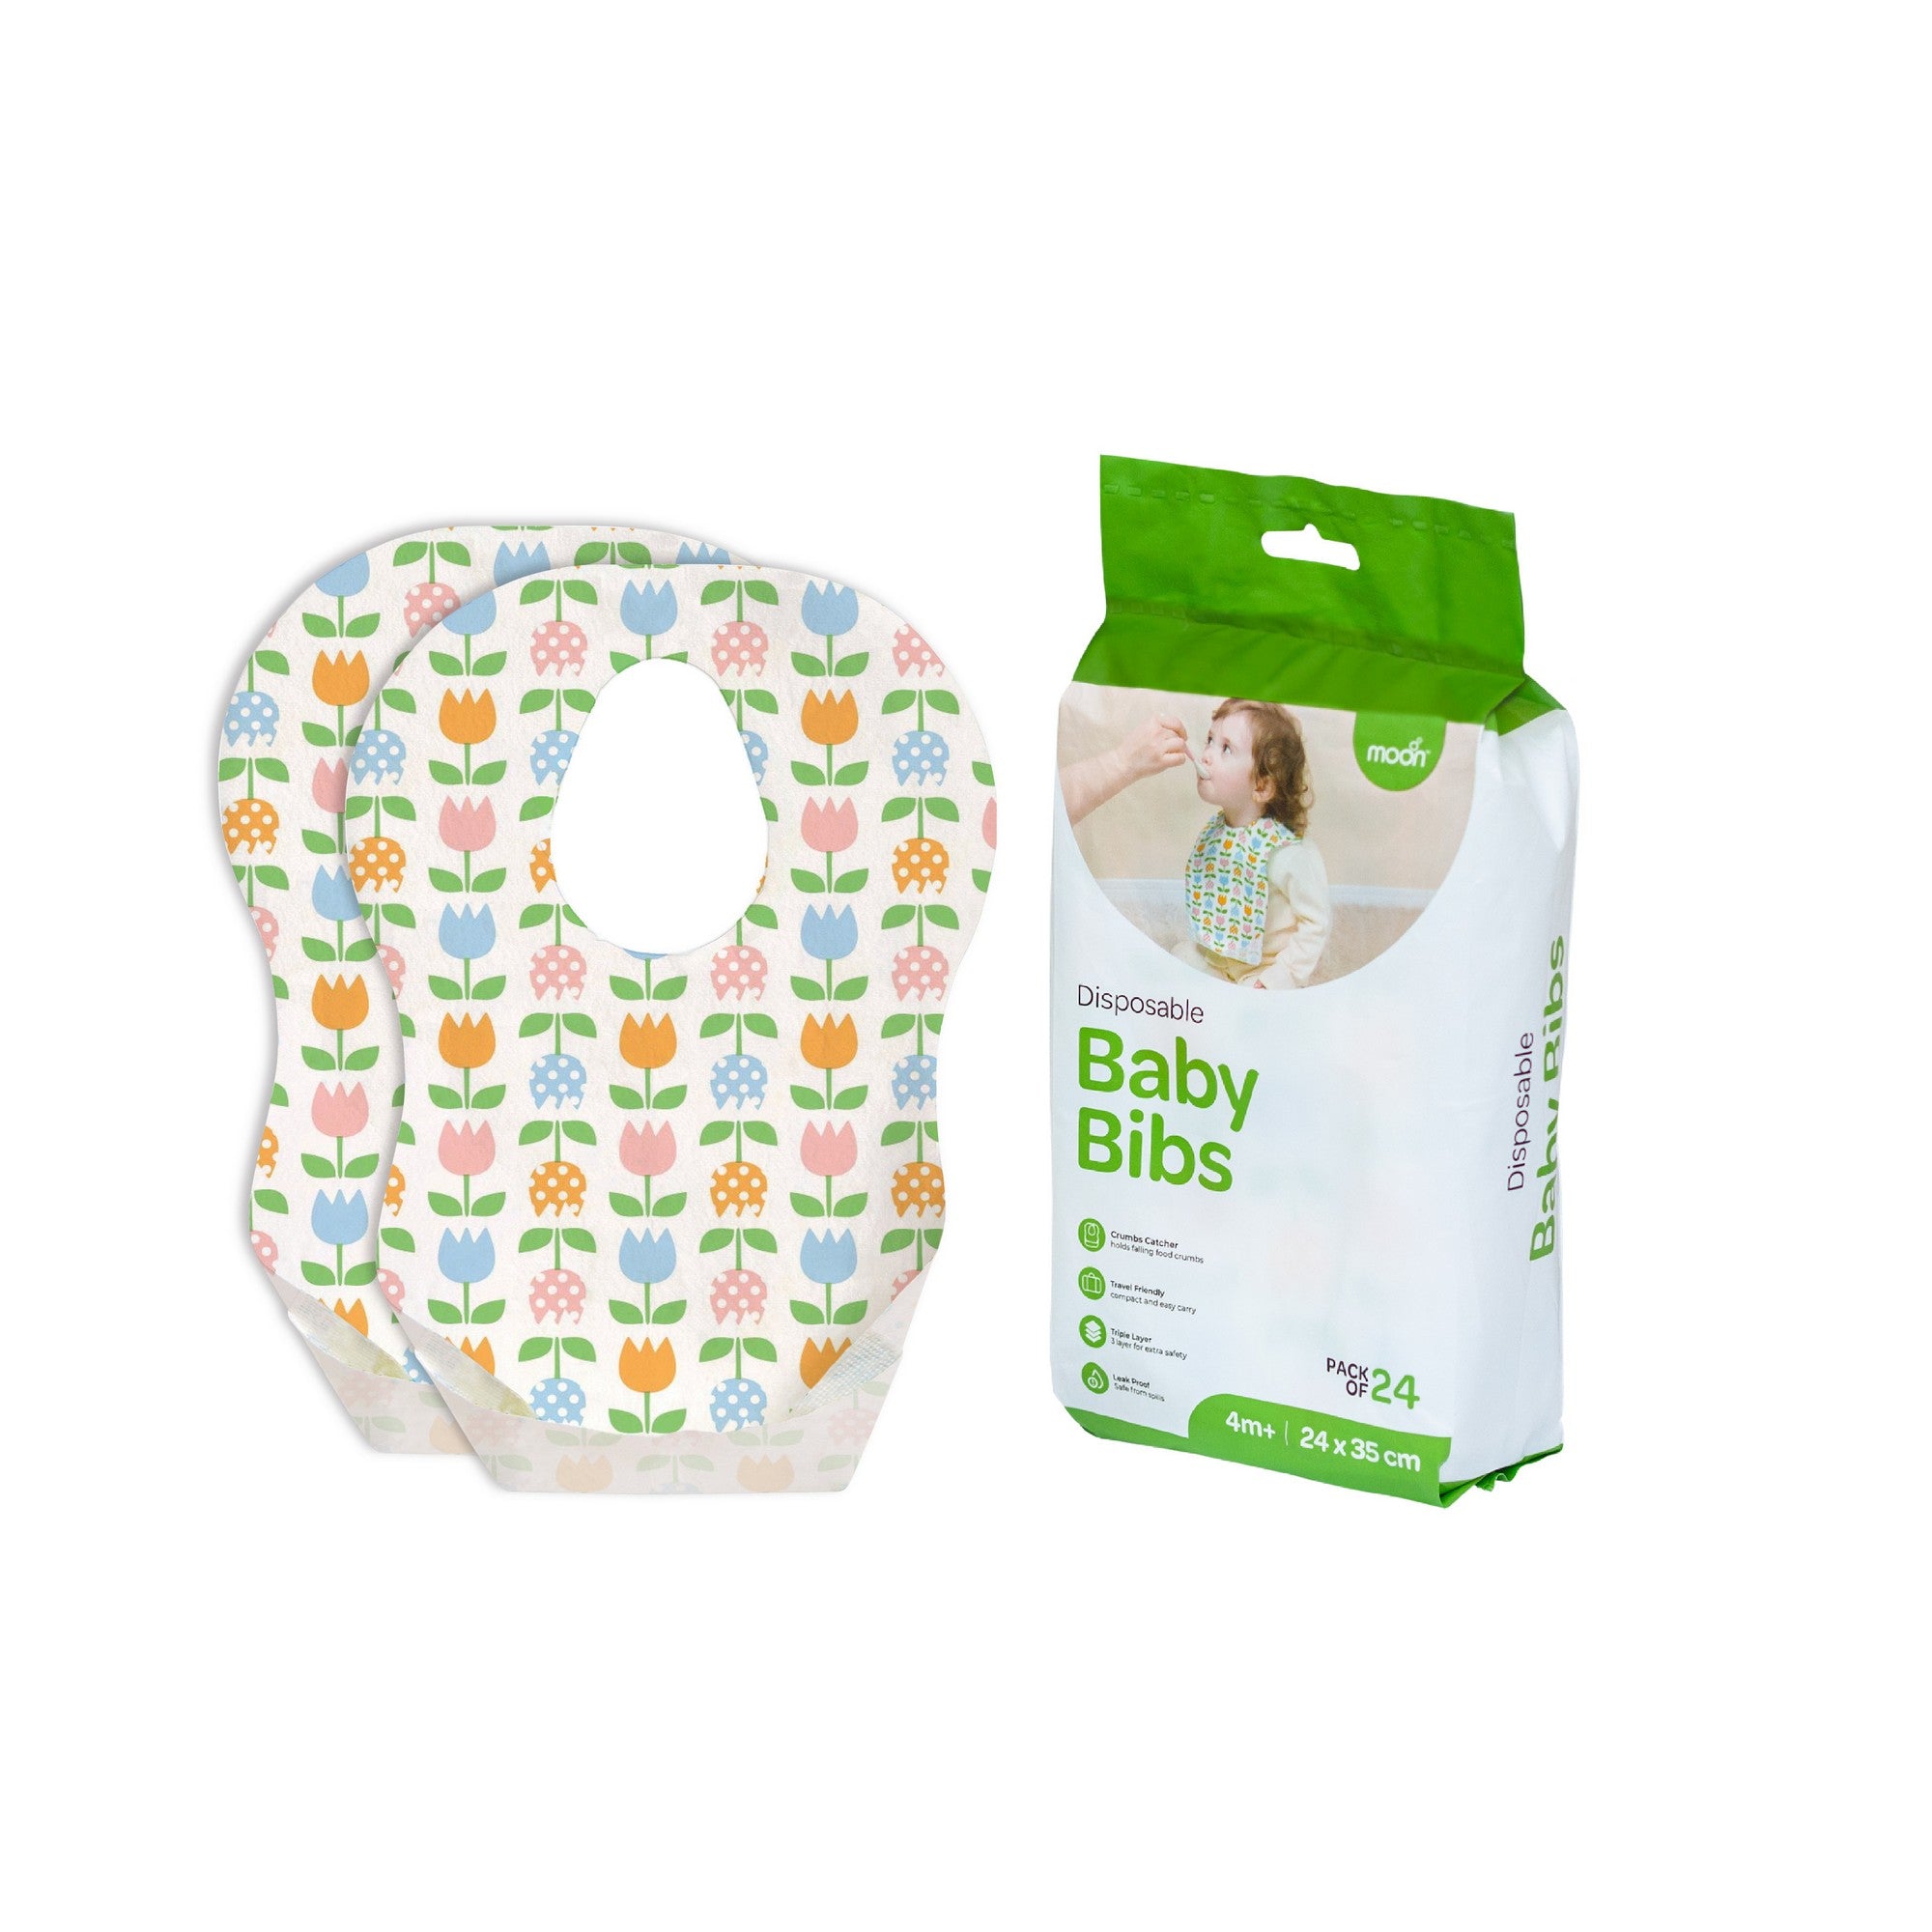 Moon Disposable baby bibs Bibs Flowers Birth to 12 Months